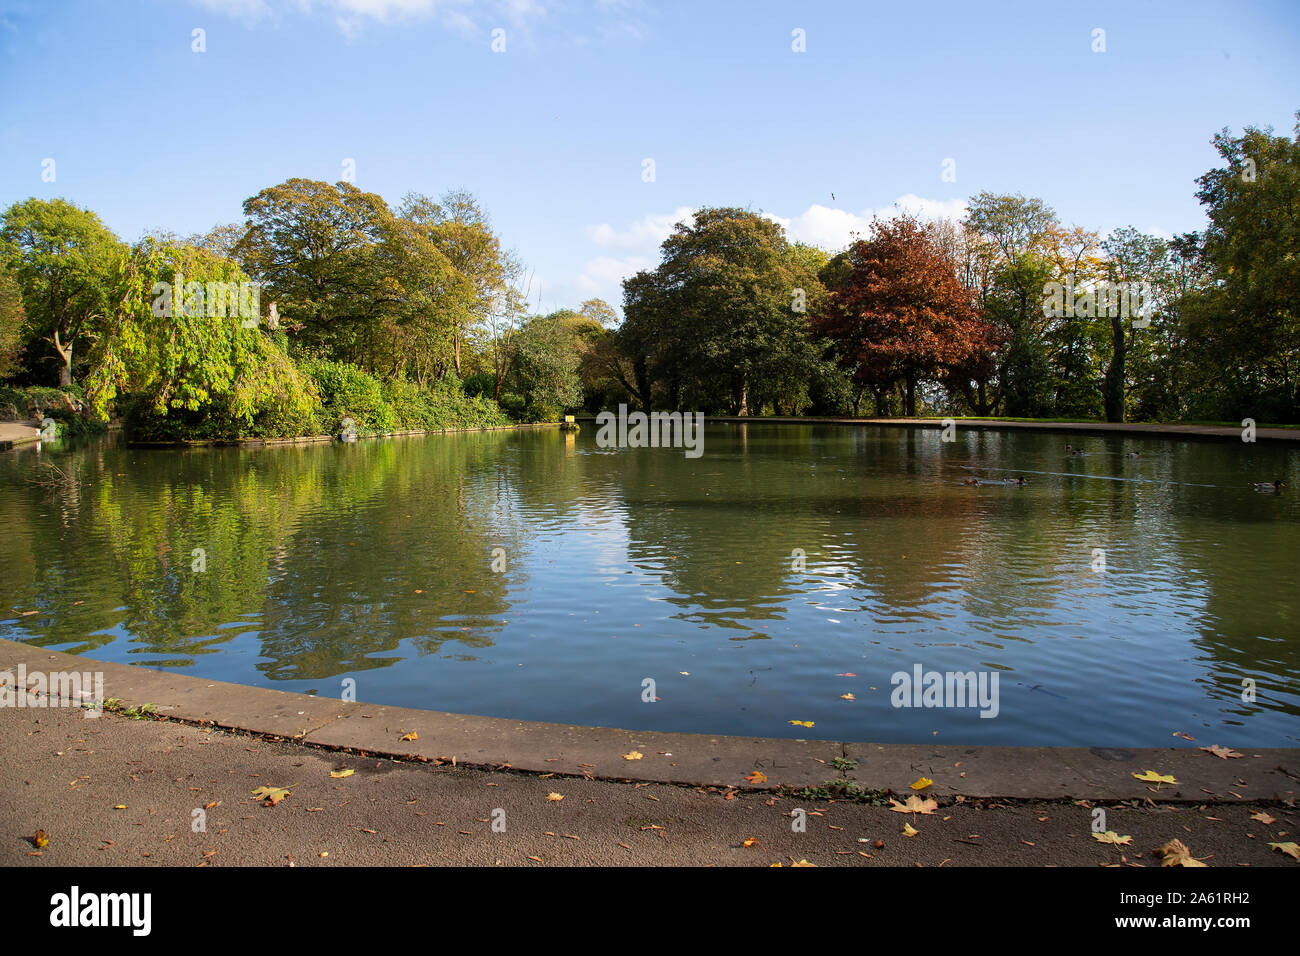 A view of the ornamental lake and autumnal leaves on the trees at Crow Nest Park, Dewsbury, West Yorkshire, U.K. Stock Photo